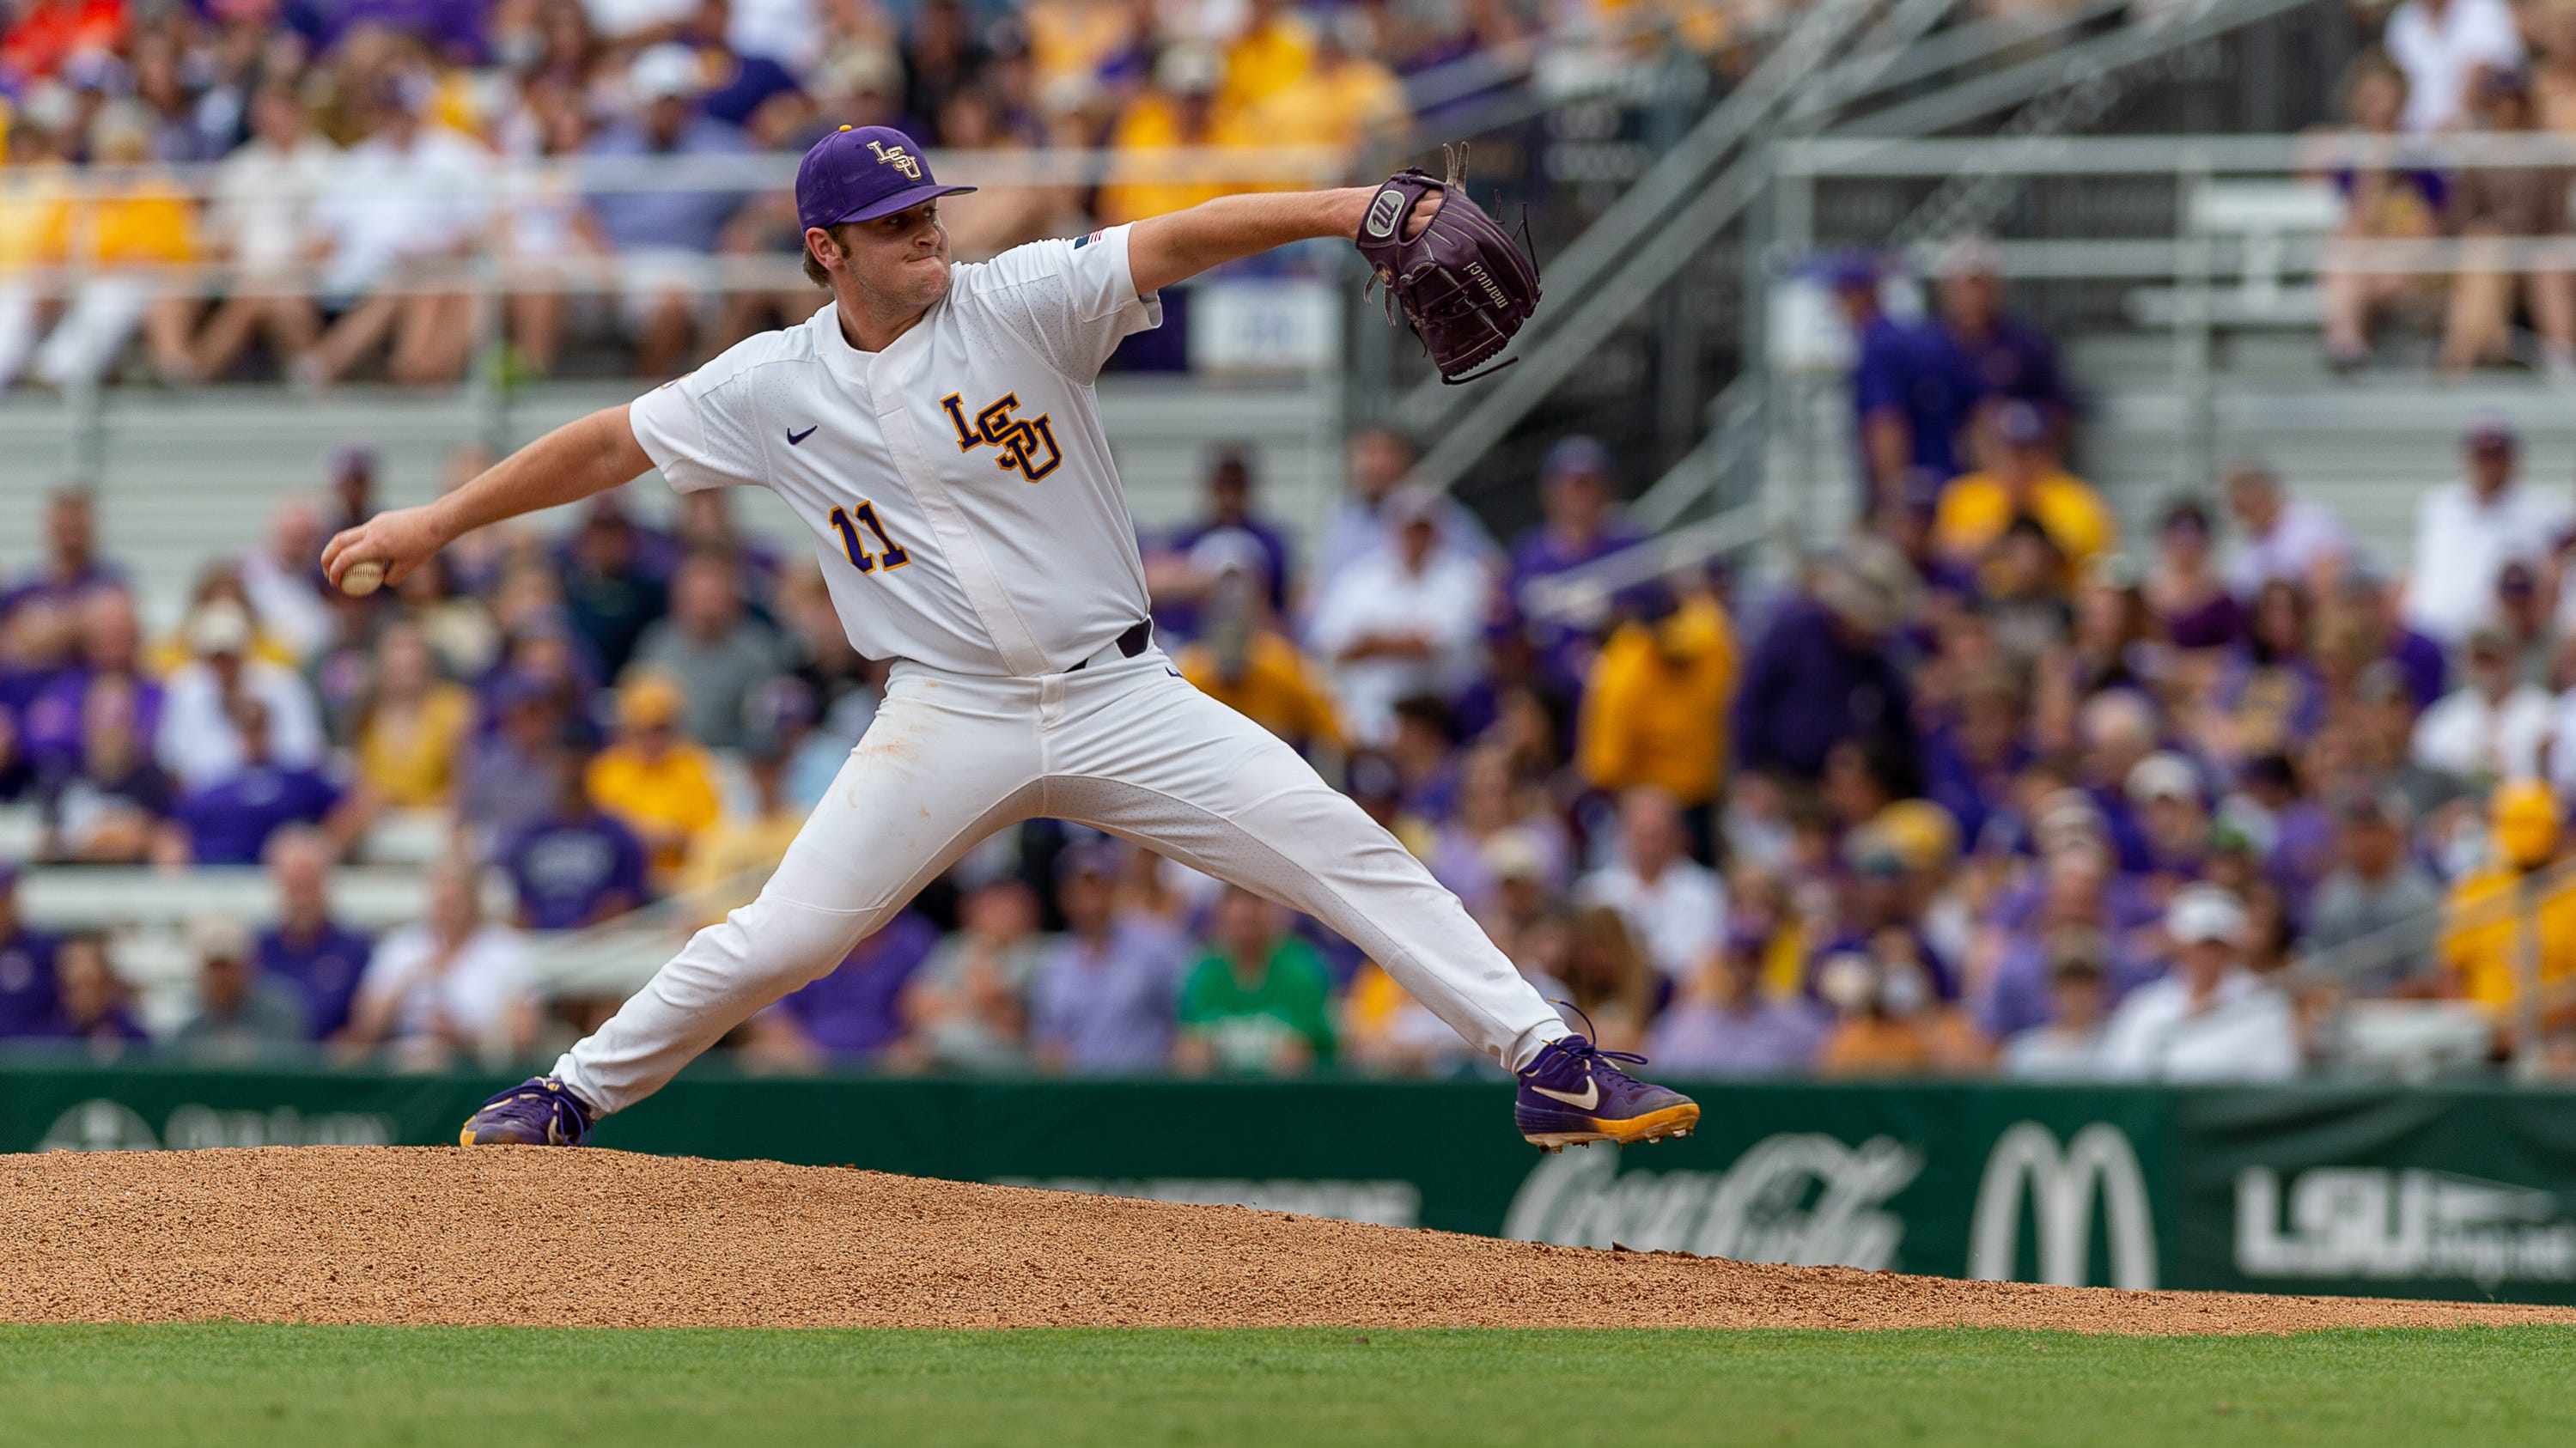 LSU baseball is close, but still 1-5 in SEC, and Vanderbilt is incoming